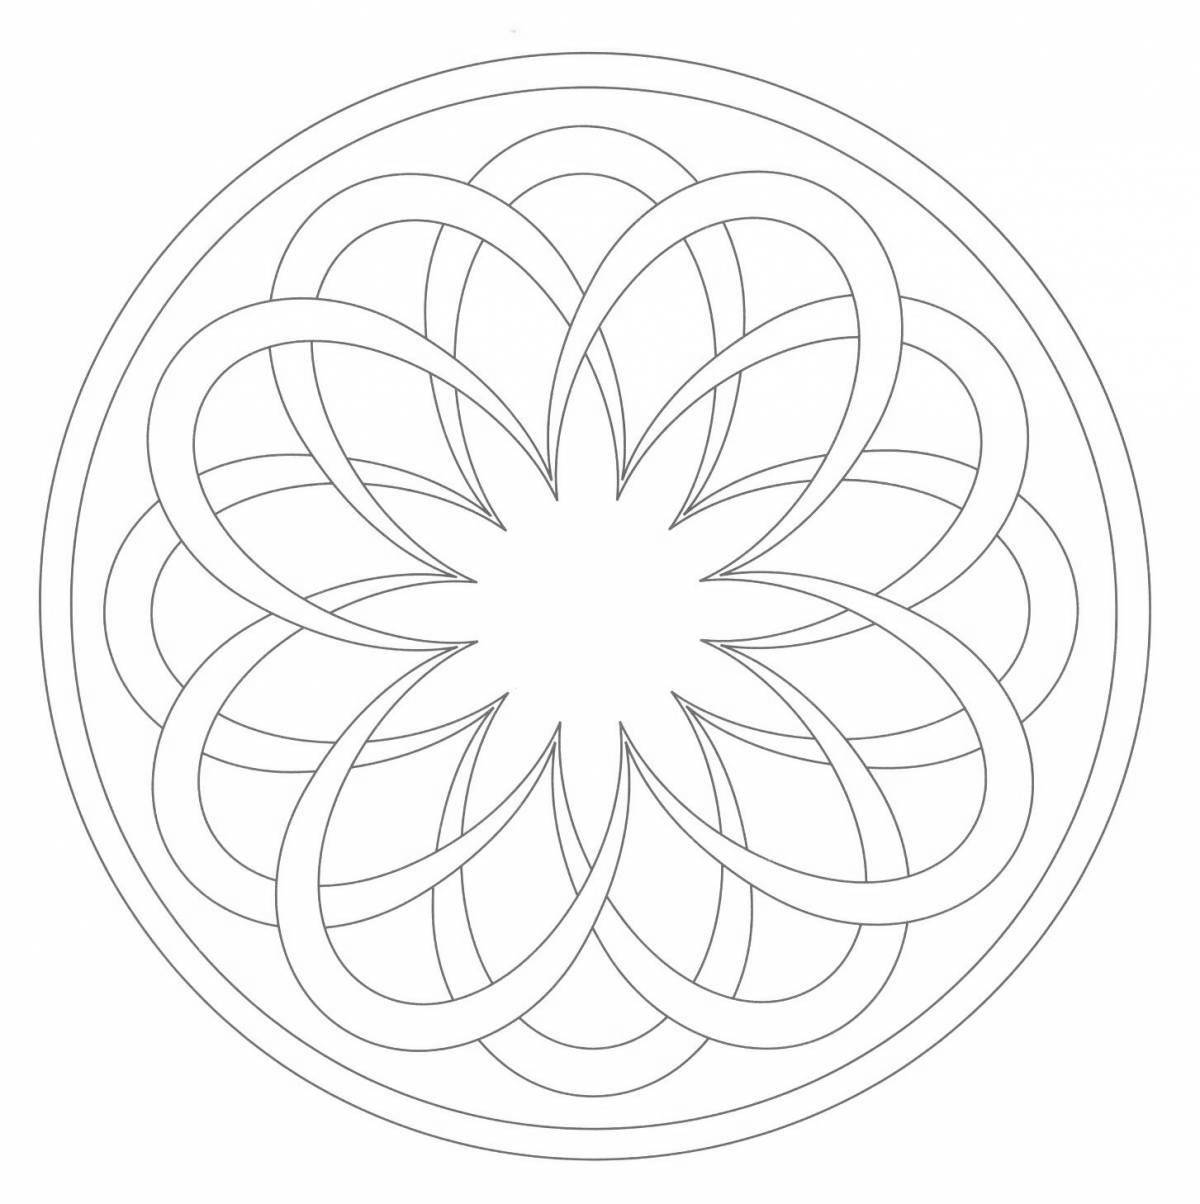 Charming flower of life coloring book